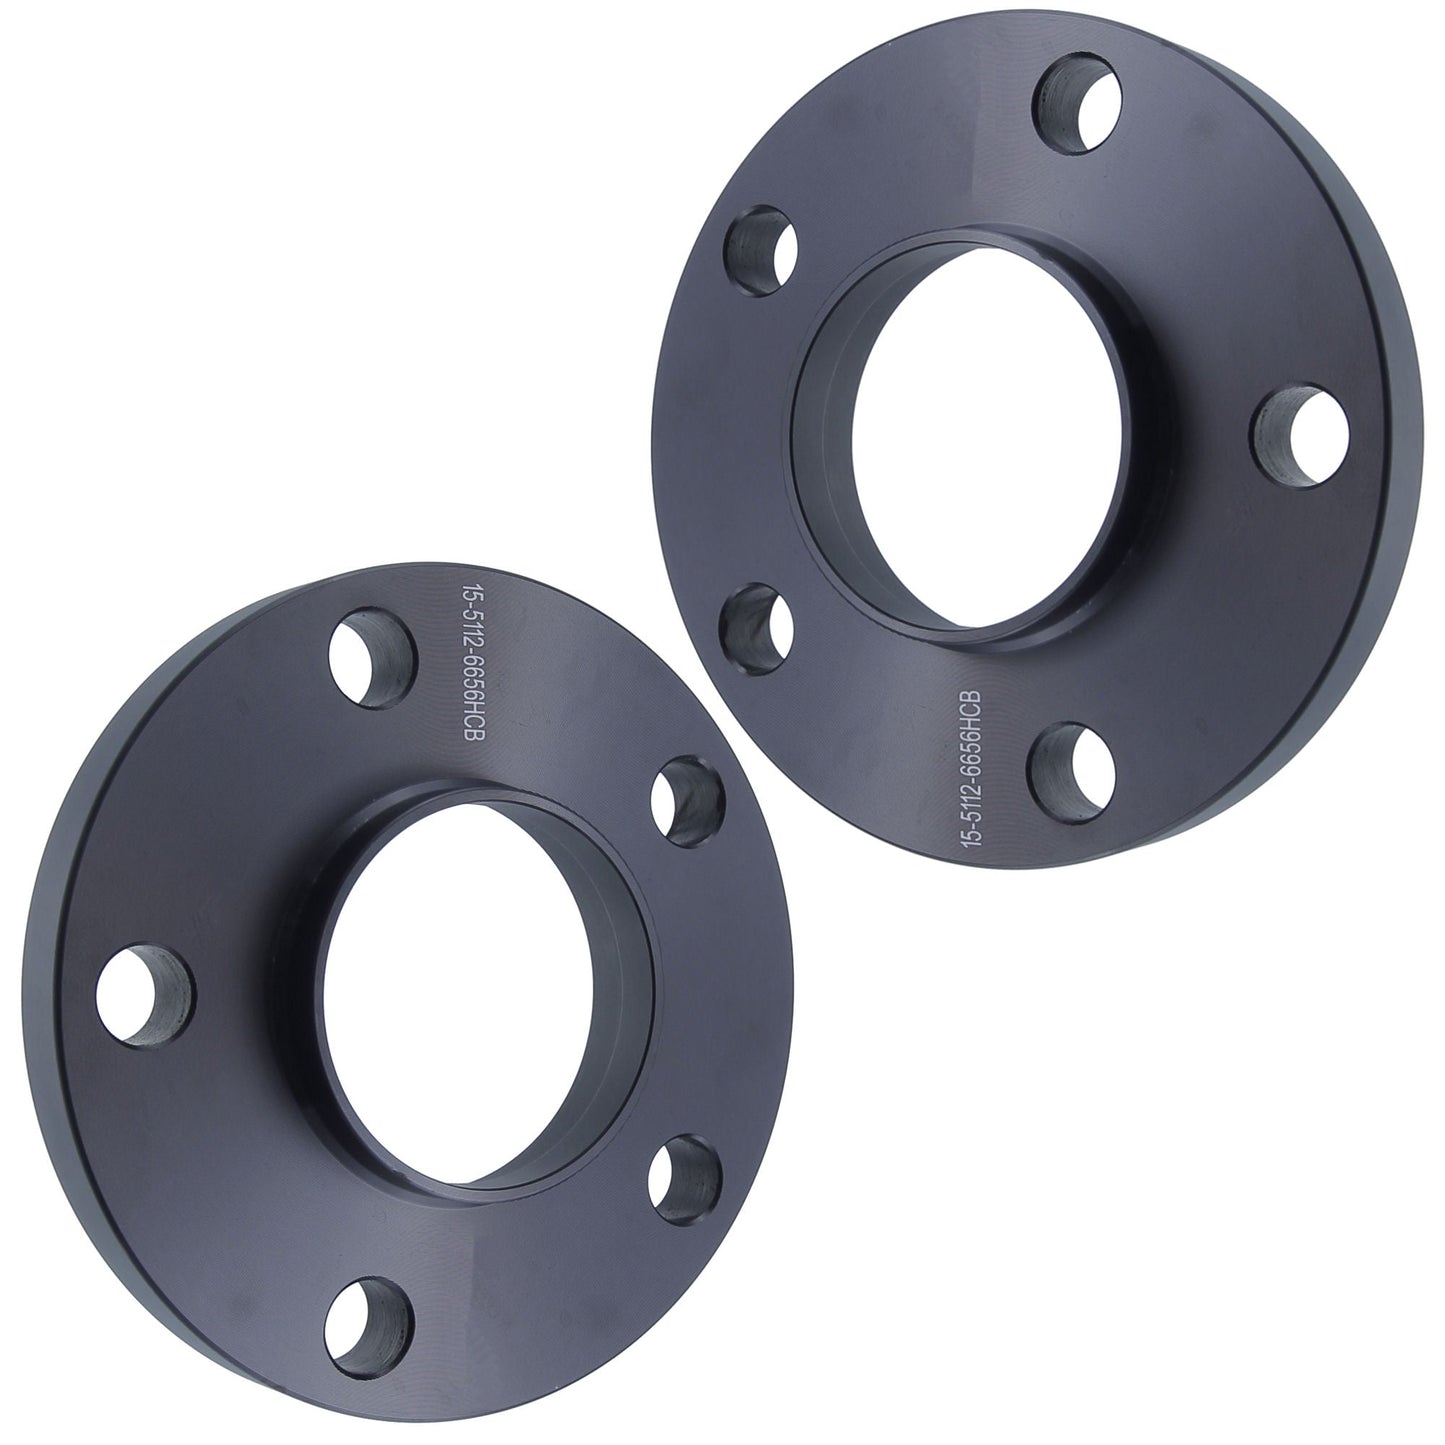 20mm Titan Wheel Spacers for VW Audi Mercedes | 5x112 | 66.56 Hubcentric | Set of 4 | Titan Wheel Accessories